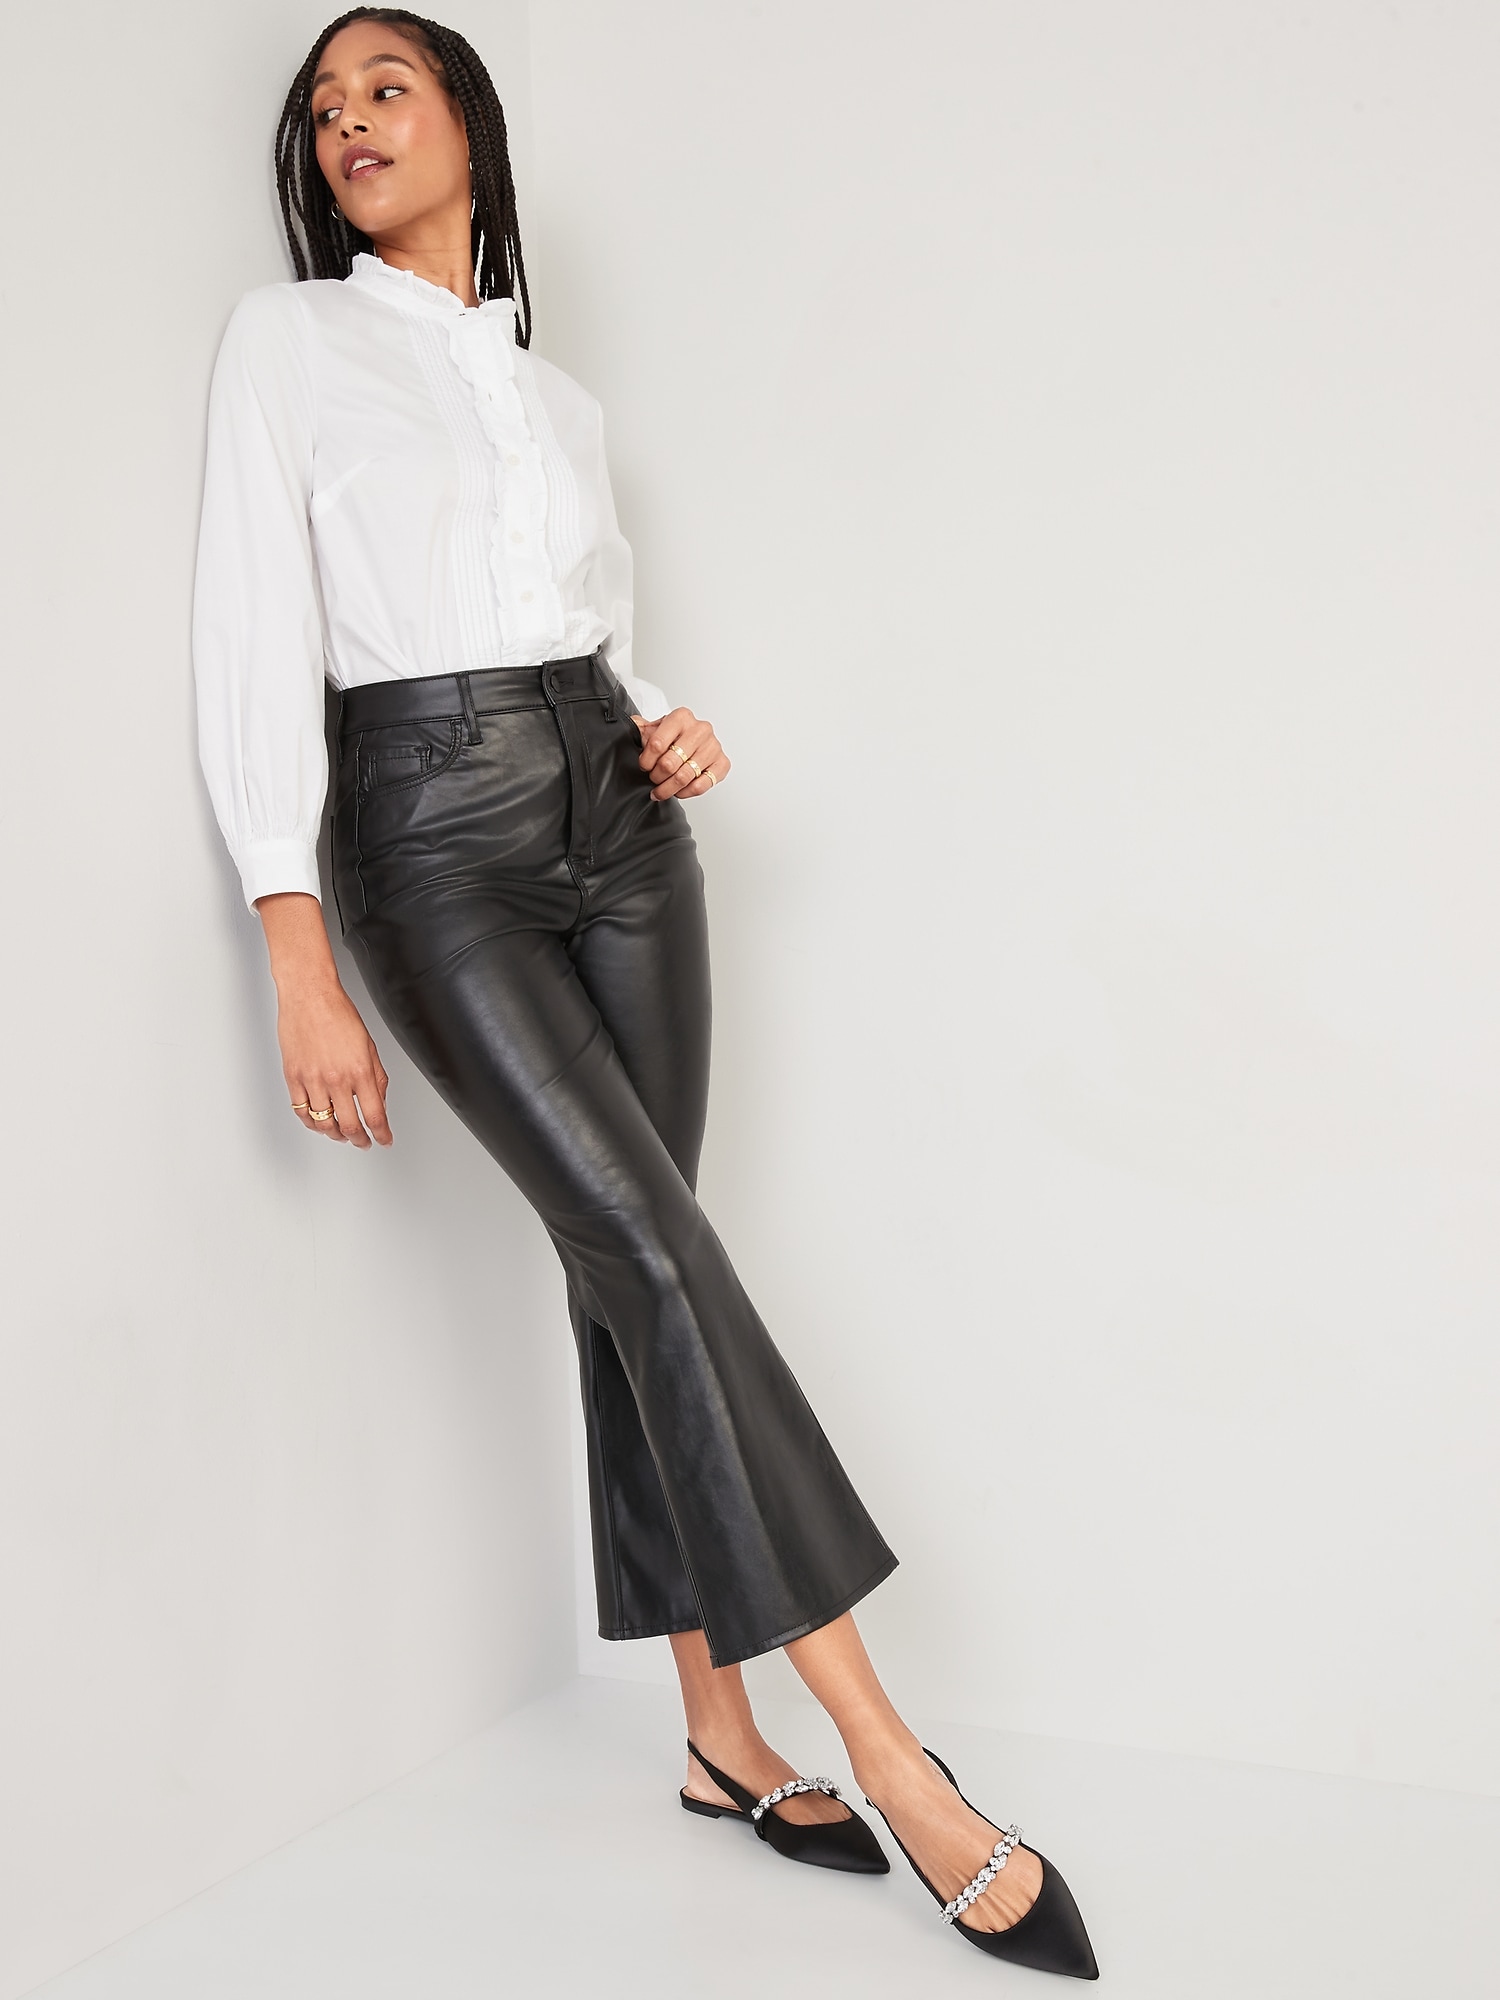 Black High Waisted Faux Leather Flare Pants